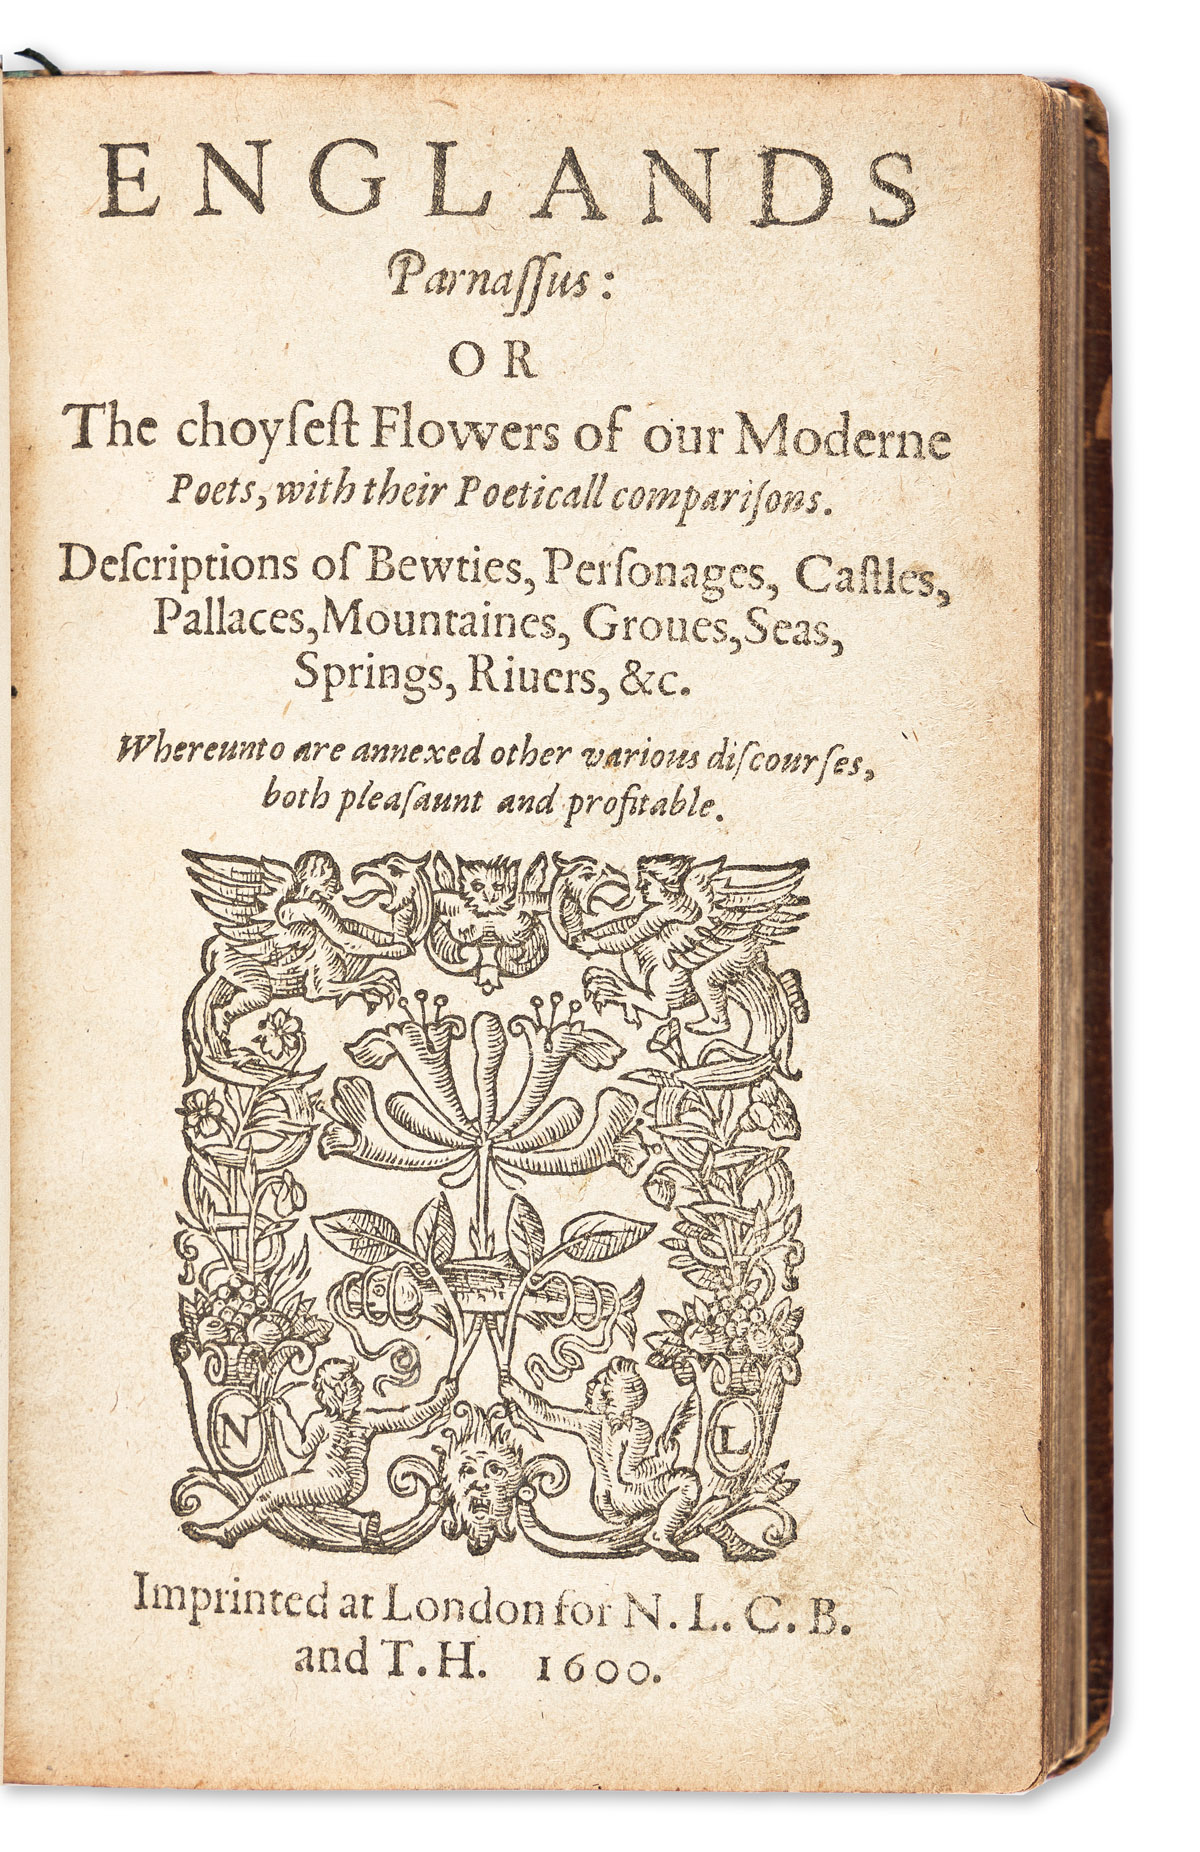 Allott, Robert, ed. (fl. circa 1600) Englands Parnassus: Or, the Choysest Flowers of our Moderne Poets, with their Poeticall Comparison